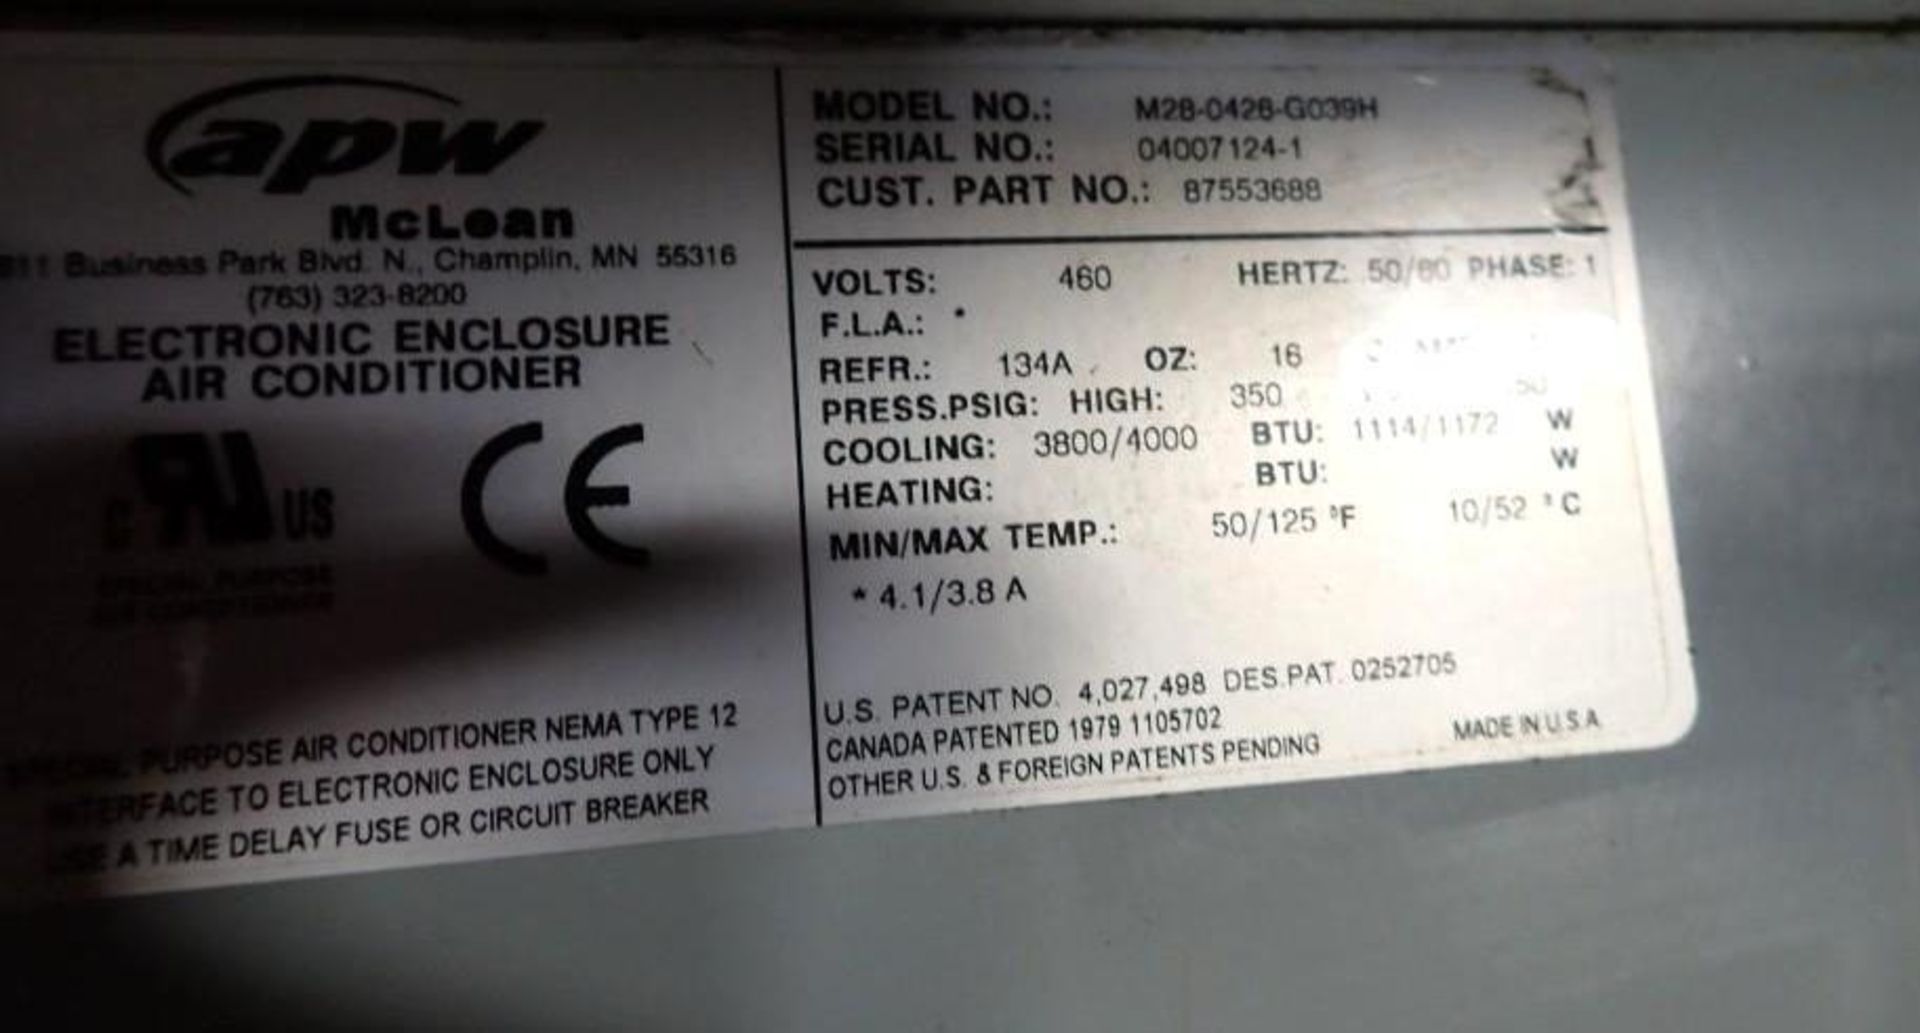 Lot of (2) APW MCLEAN #M28-0426-G039H Electronic Enclosure Air Conditioners - Image 3 of 3